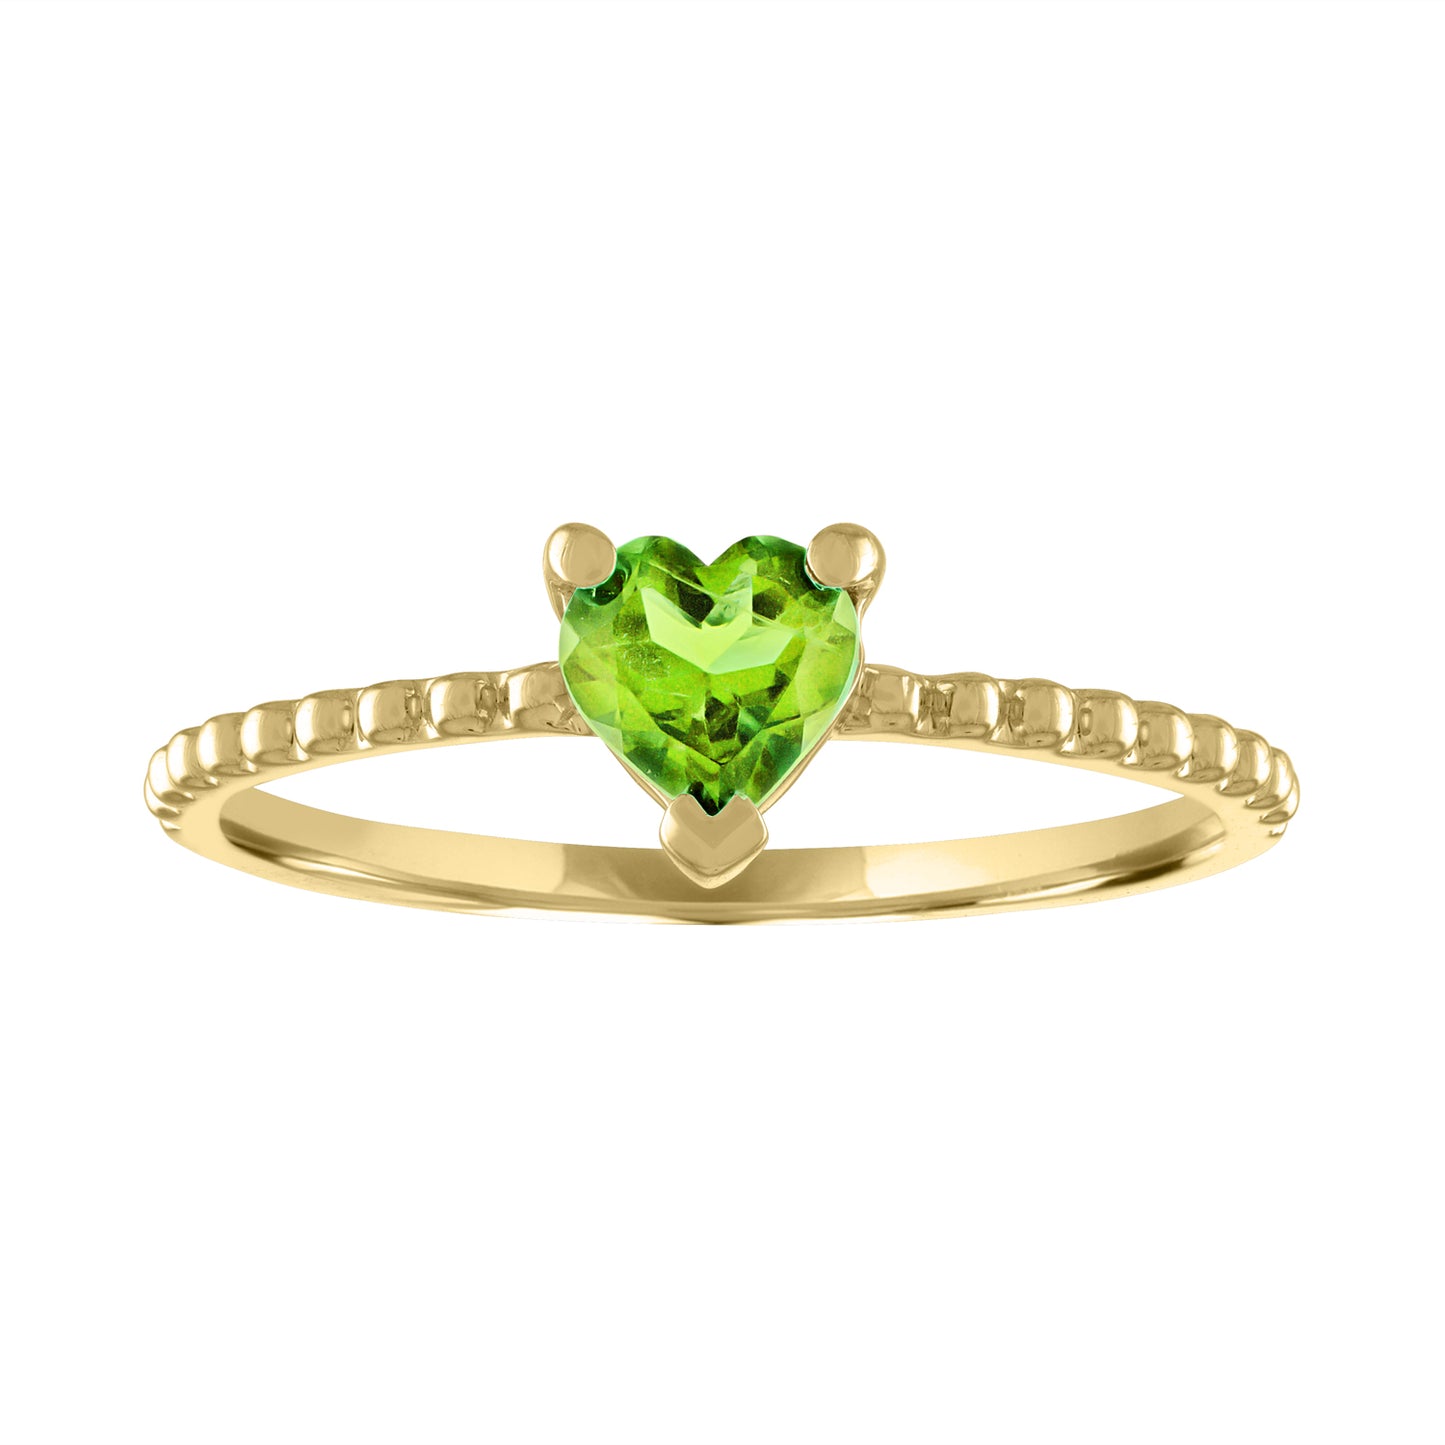 Yellow gold beaded skinny band with a heart shaped peridot in the center. 